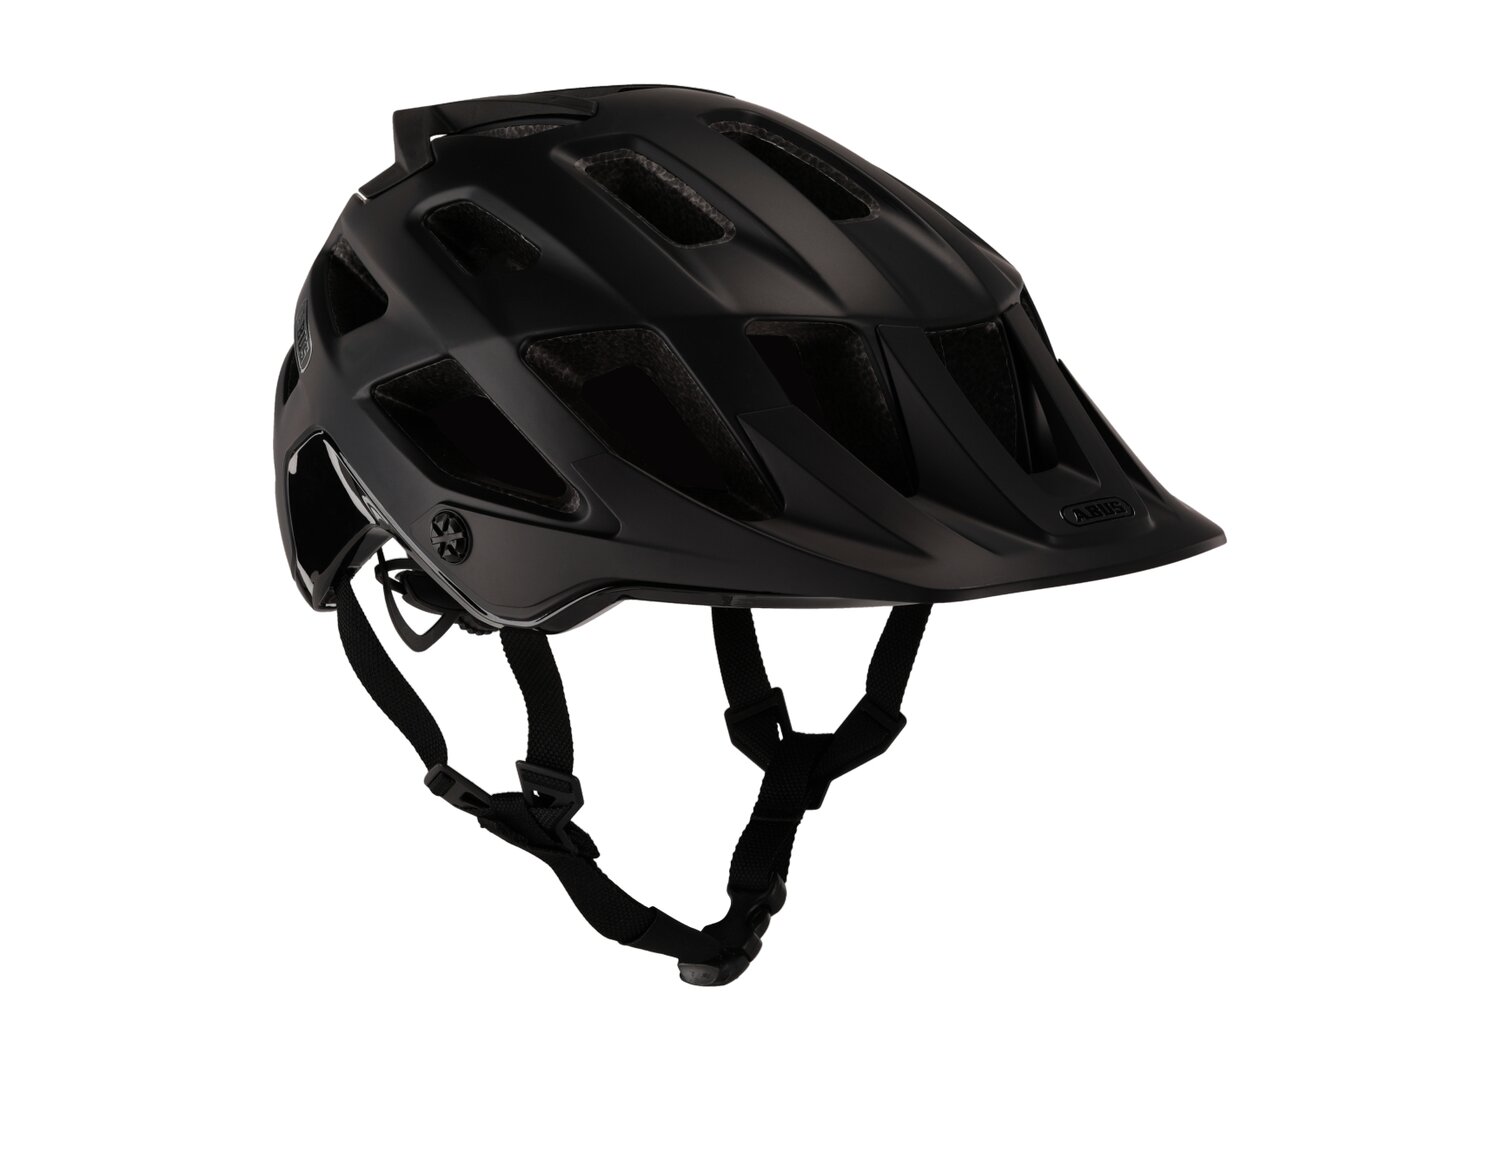 Kask rowerowy MTB ABUS MOVENTOR 2.0